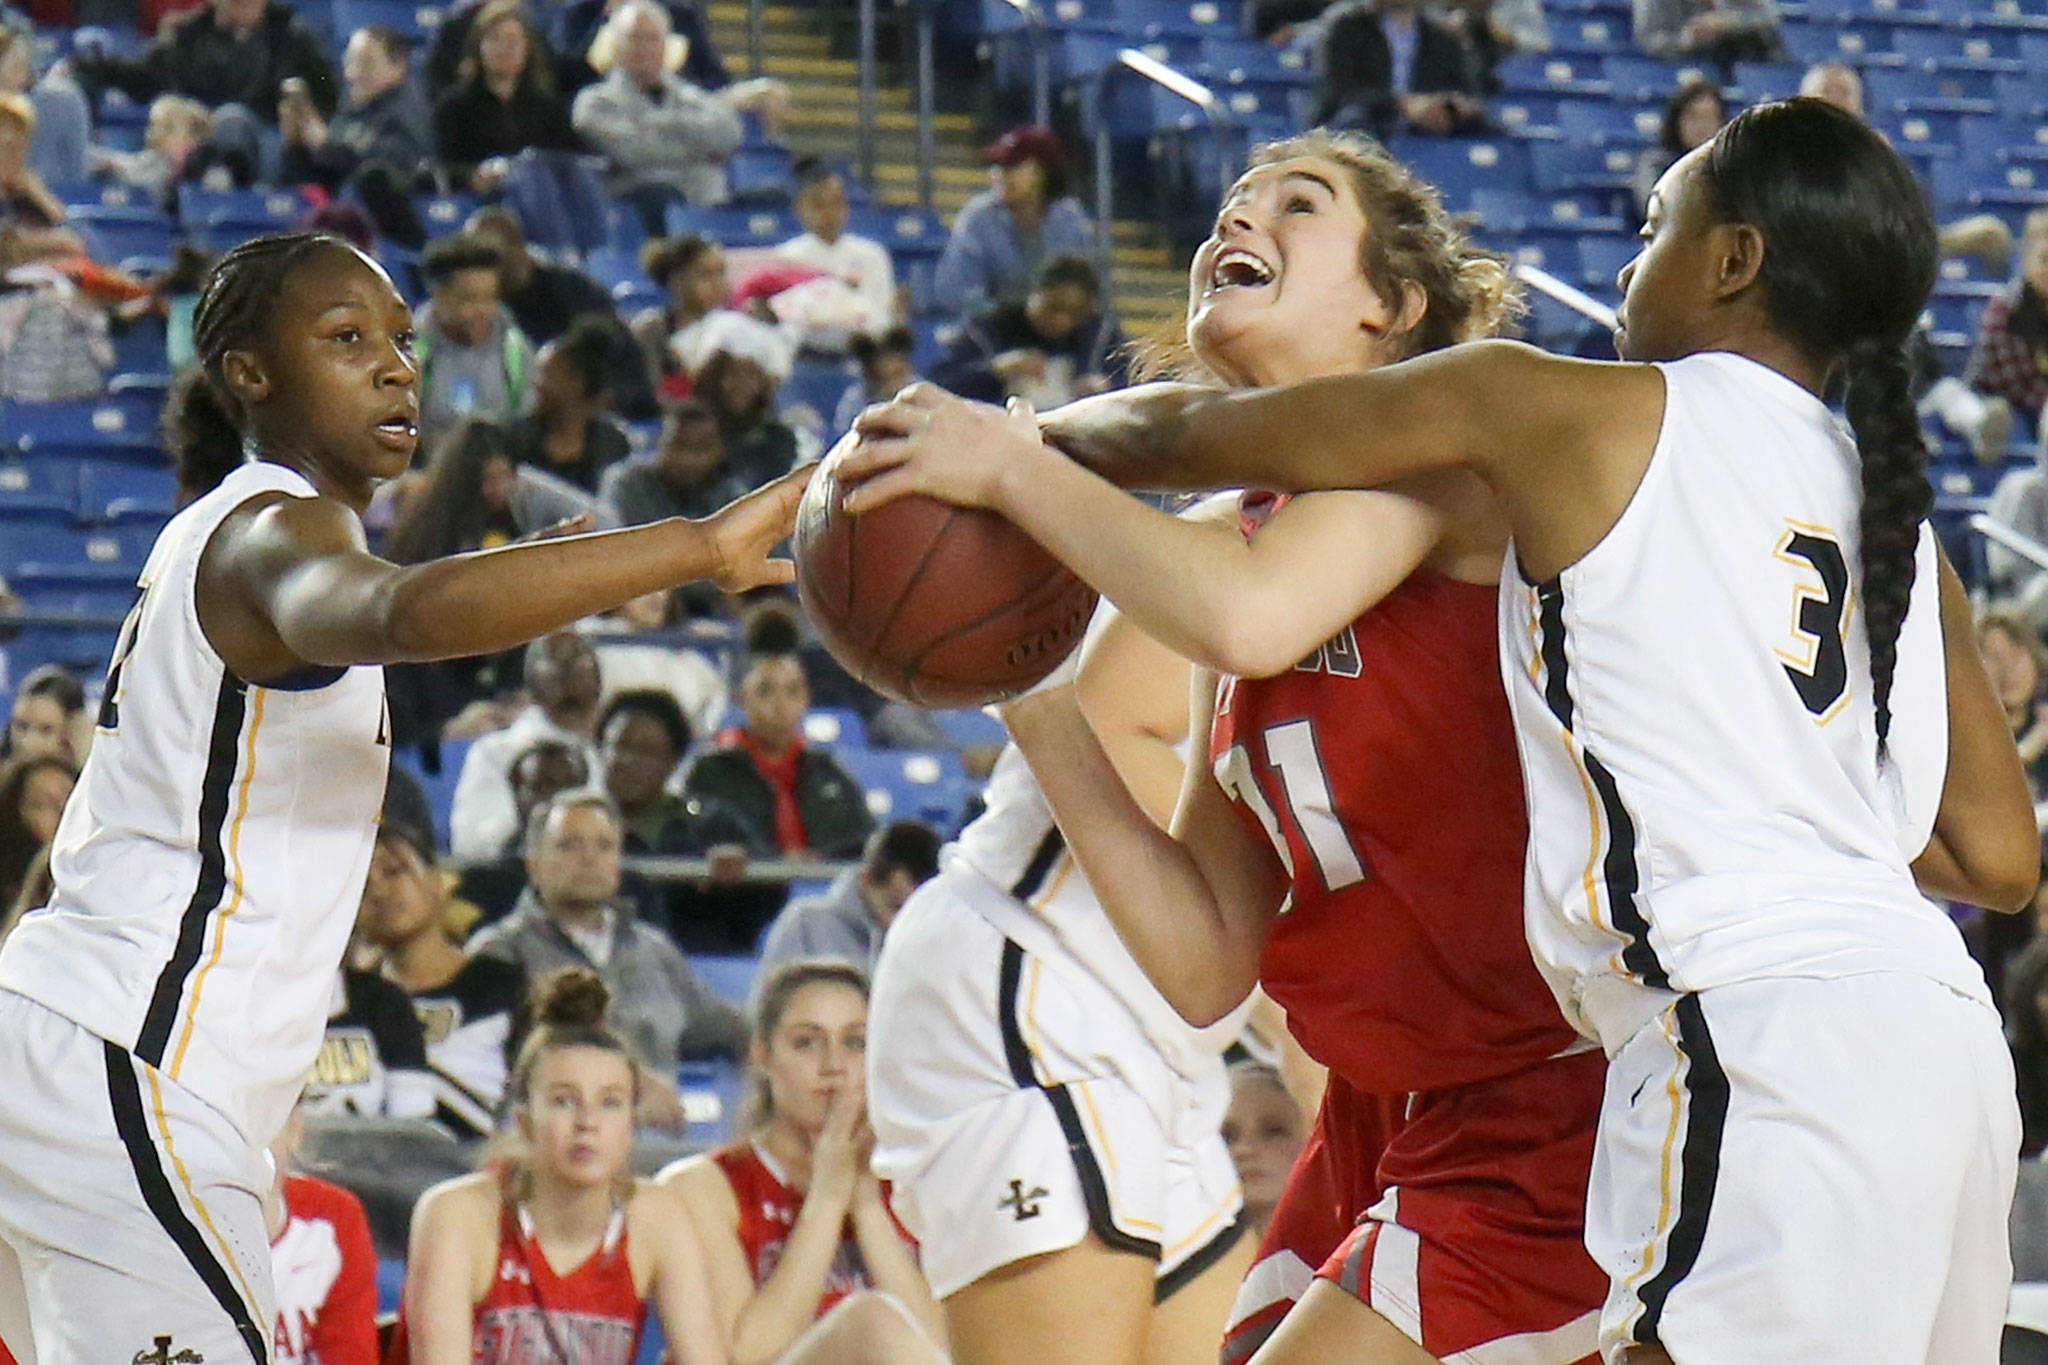 Stanwood’s Madison Chisman attempts a shot and is fouled by Lincoln’s Nashontae Frazier (right) with Lincoln’s Kondalia Montgomery (left) looking during the WIAA state basketball tournament Wednesday at the Tacoma Dome in Tacoma on March 1, 2018. (Kevin Clark / The Daily Herald)